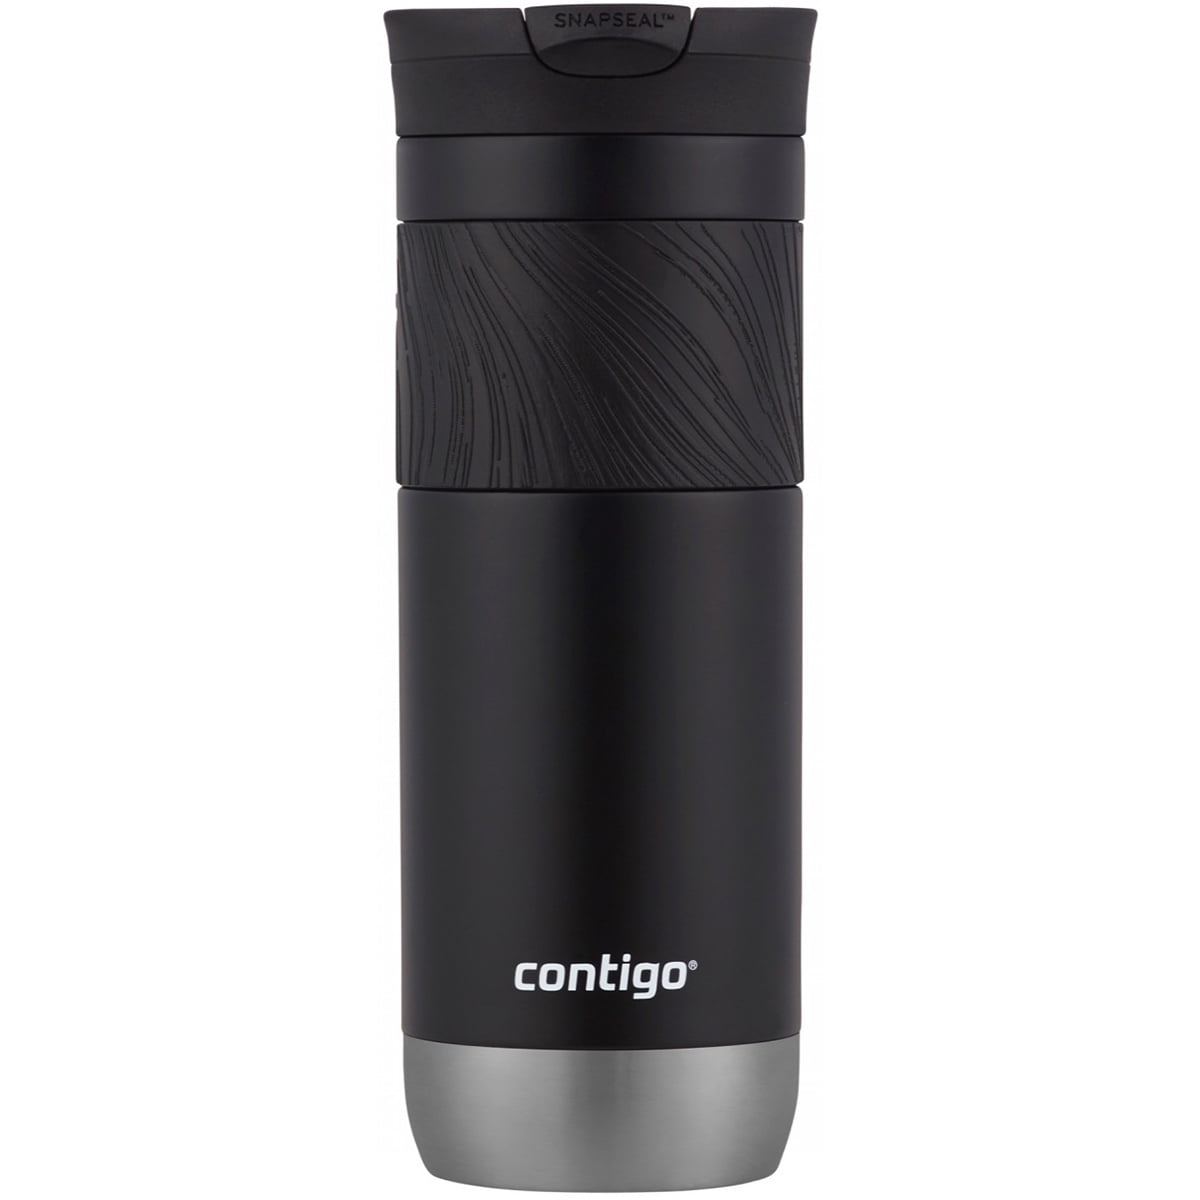 Contigo Byron 2.0 Stainless Steel Travel Mug with SNAPEAL Lid and